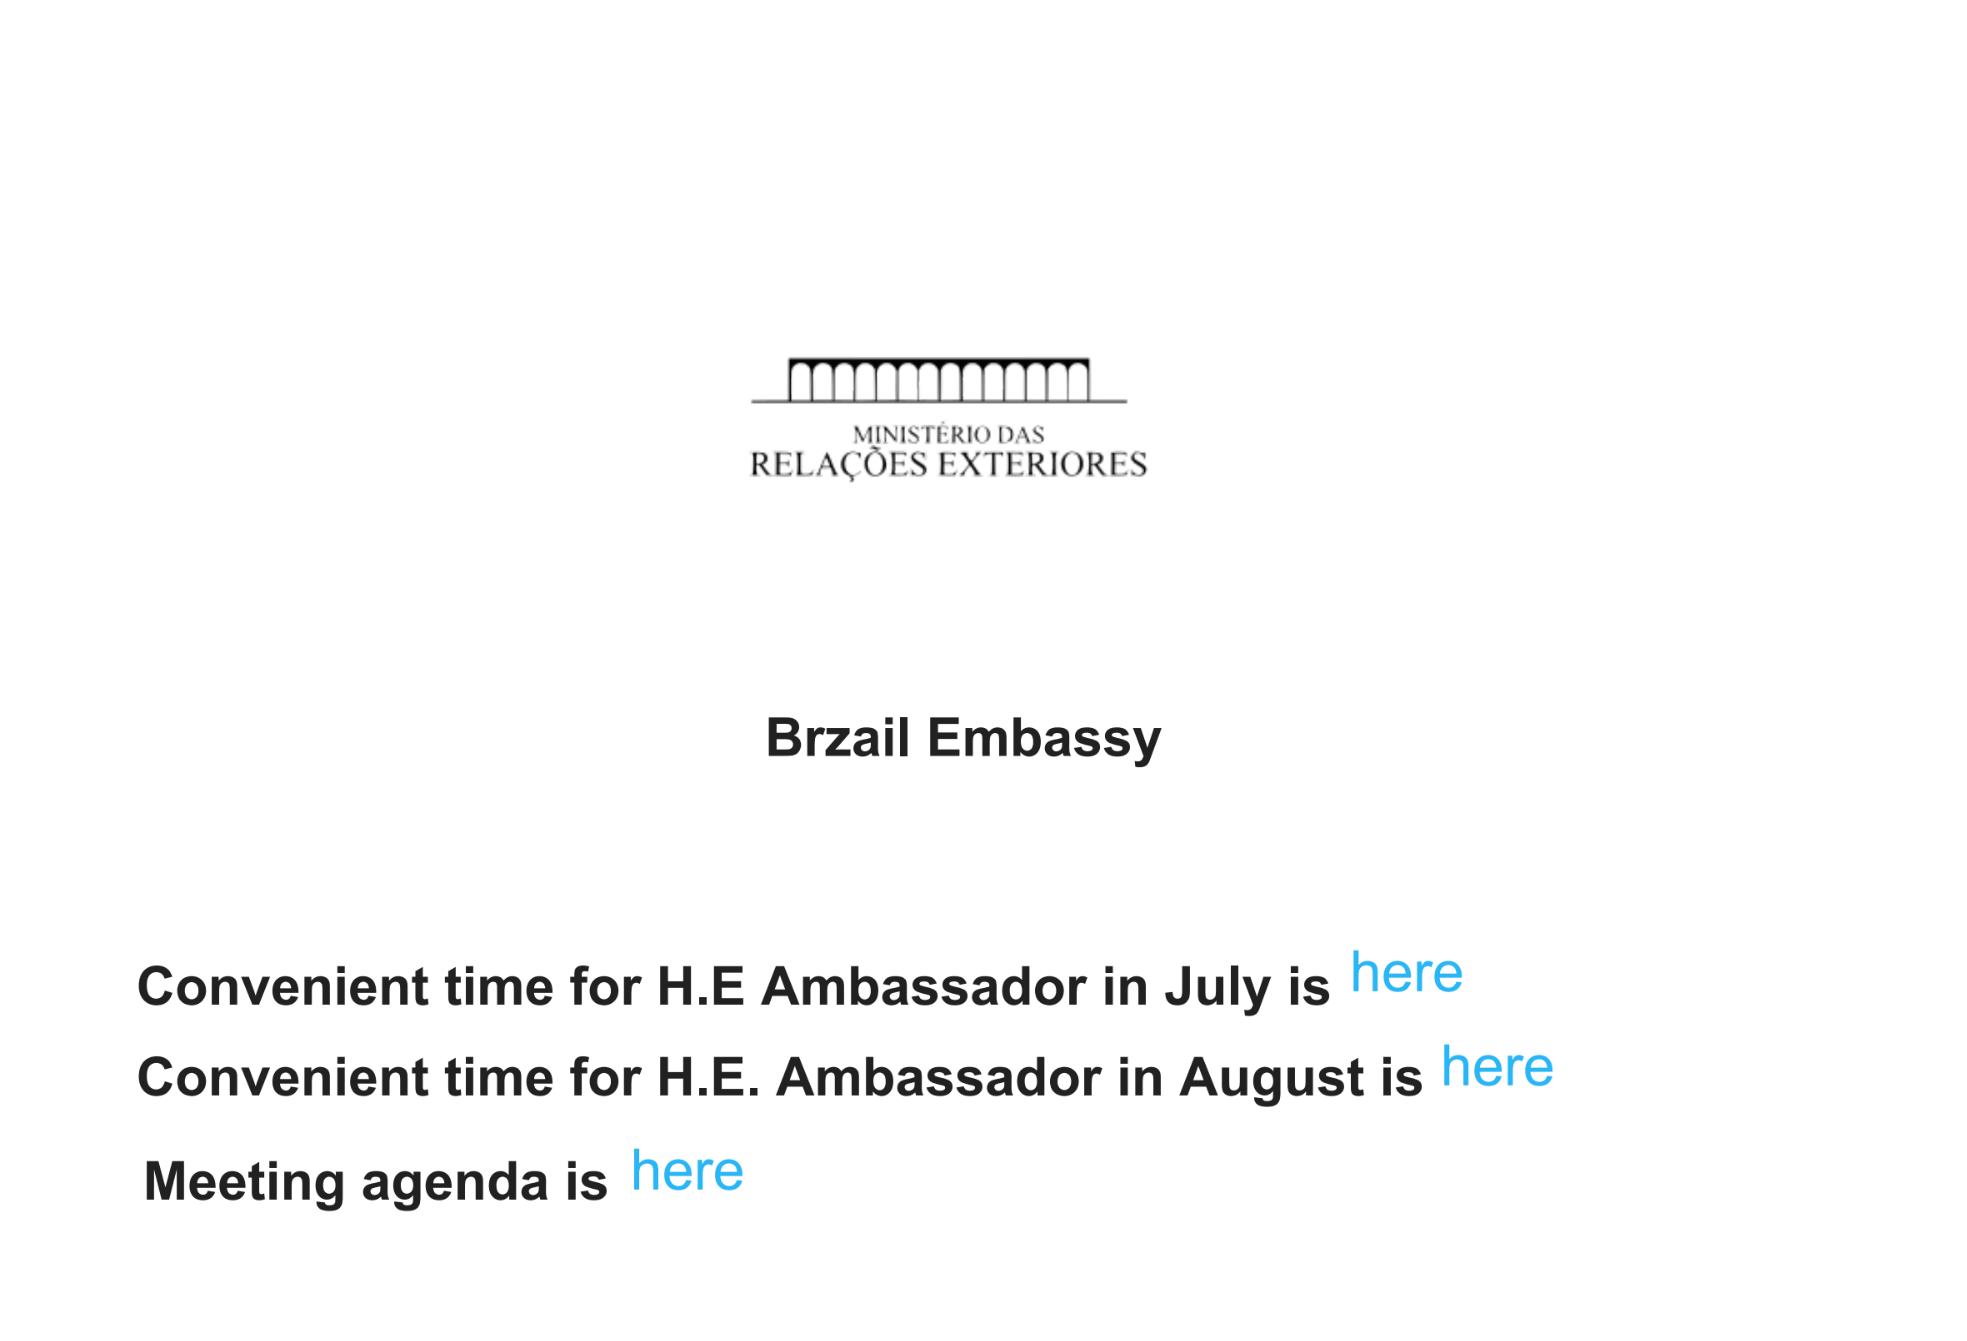 Campaign 2 lure file Agenda.pdf - Addressed to an embassy in Brazil, the screenshot shows the same supposed link to a meeting agenda. Notably, "Brazil" is misspelled as "Brzail." 